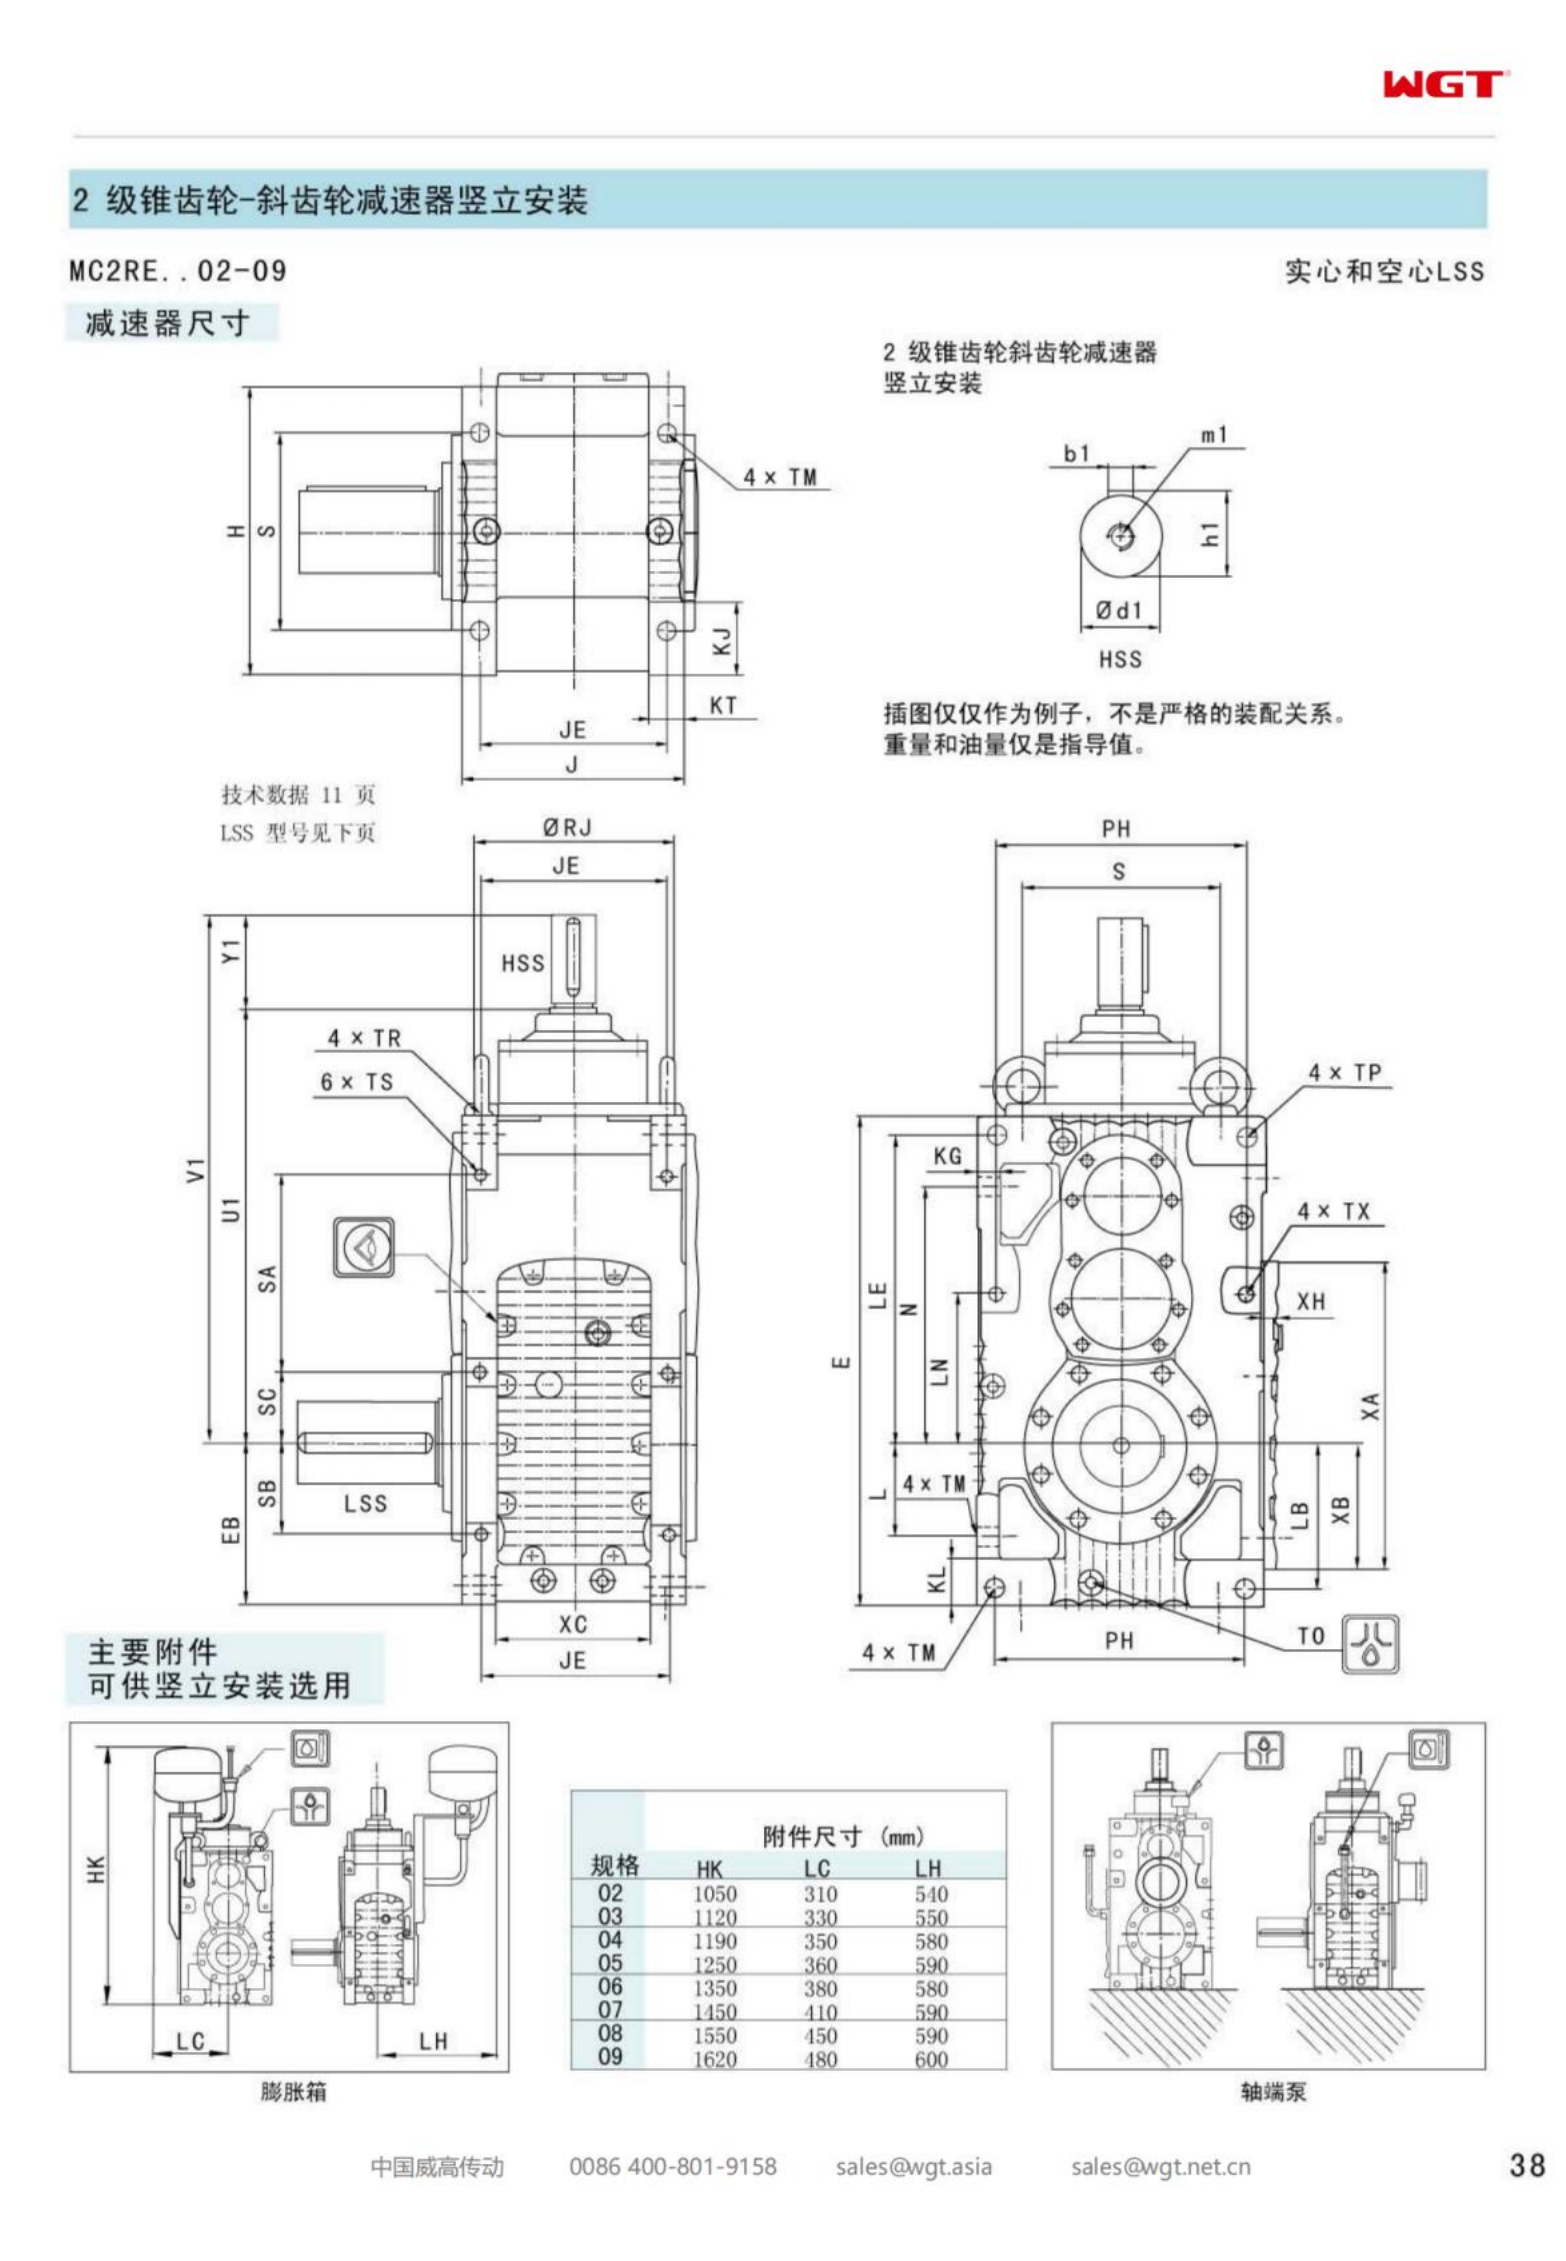 MC2RESF02 Replace_SEW_MC_Series Gearbox